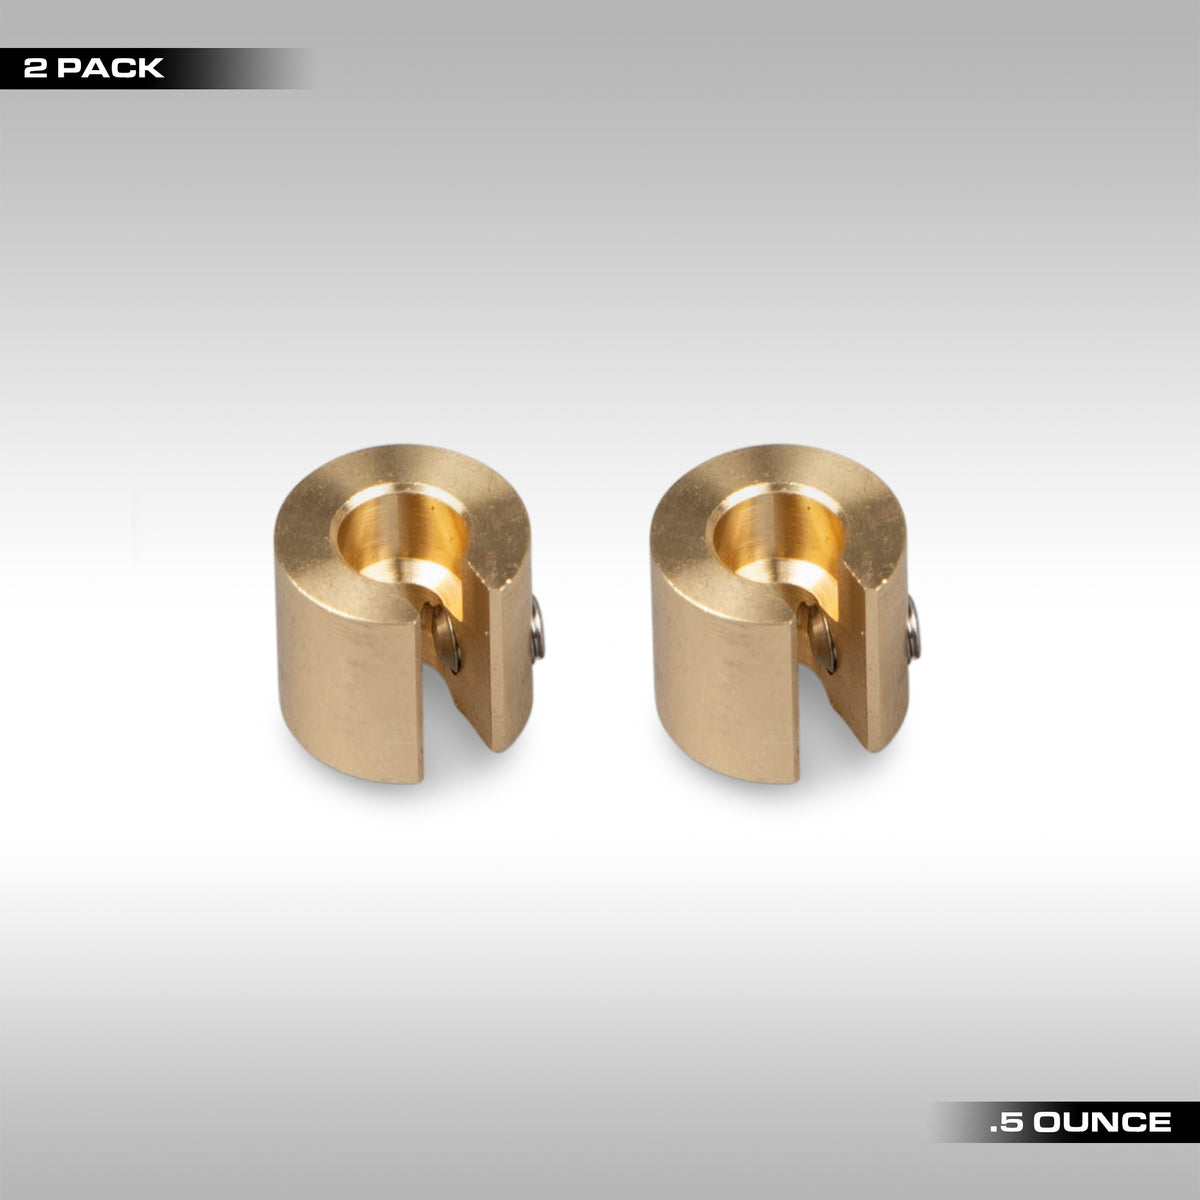 2 pack .5 ounce No-Mar wheel weights for balancing your motorcycle wheels. Machined brass weights are designed to lock onto the spokes with a set screw letting you get the perfect balance for your wheels. No Mar motorcycle wheel weights.